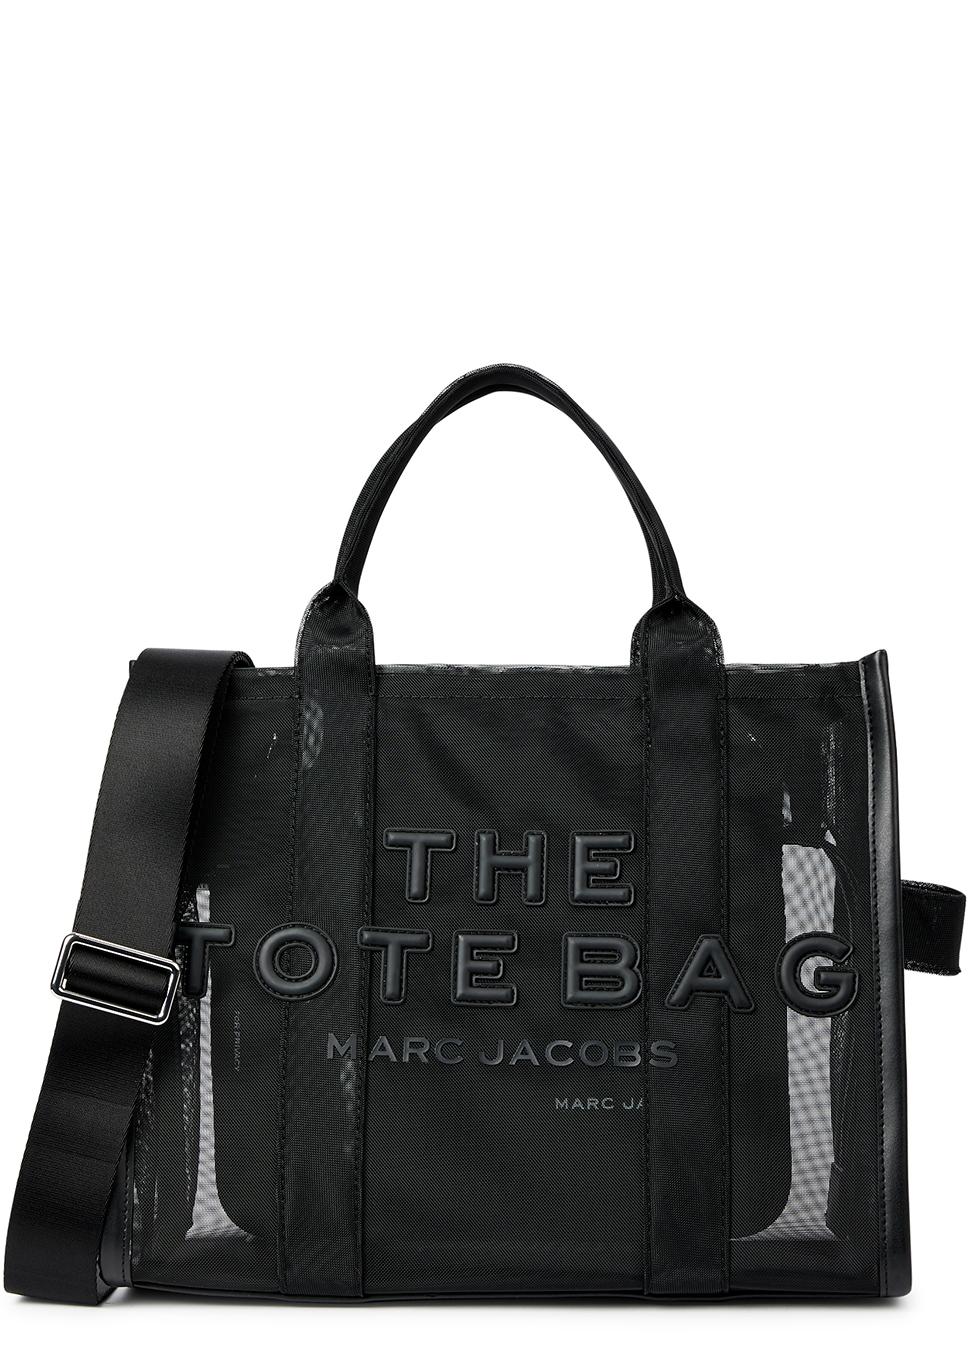 Marc Jacobs The Tote Medium Mesh Tote in Black | Lyst